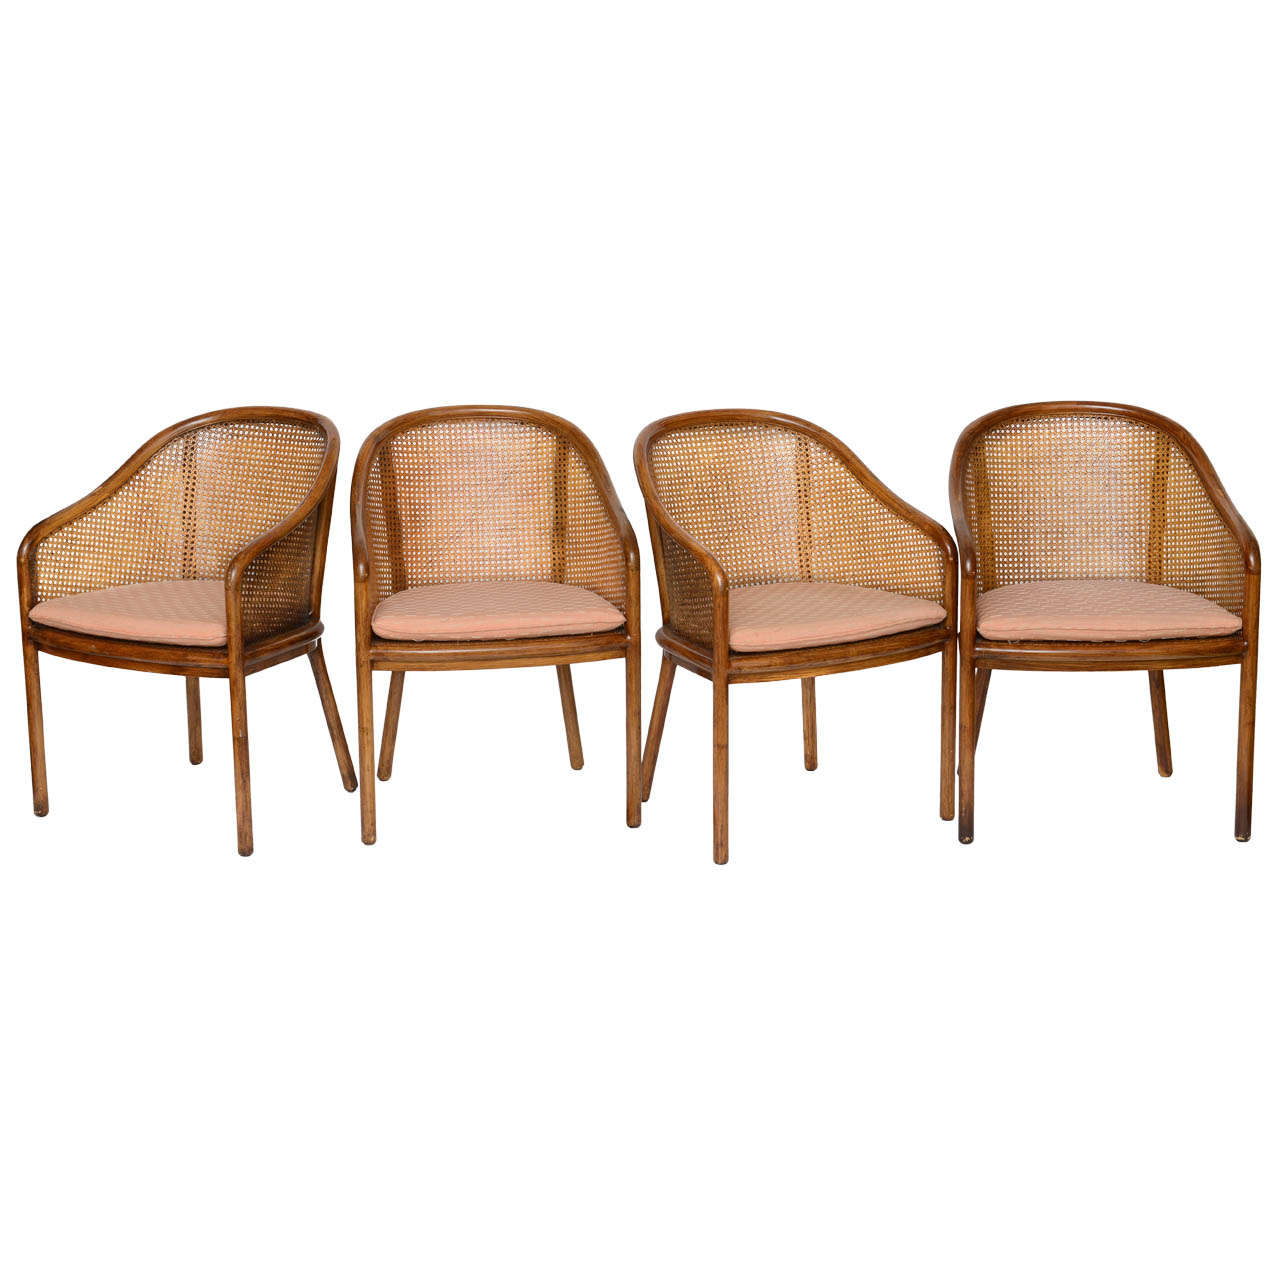 4 Ward Bennett Chairs for Brickell Cane and Ashwood 1970s